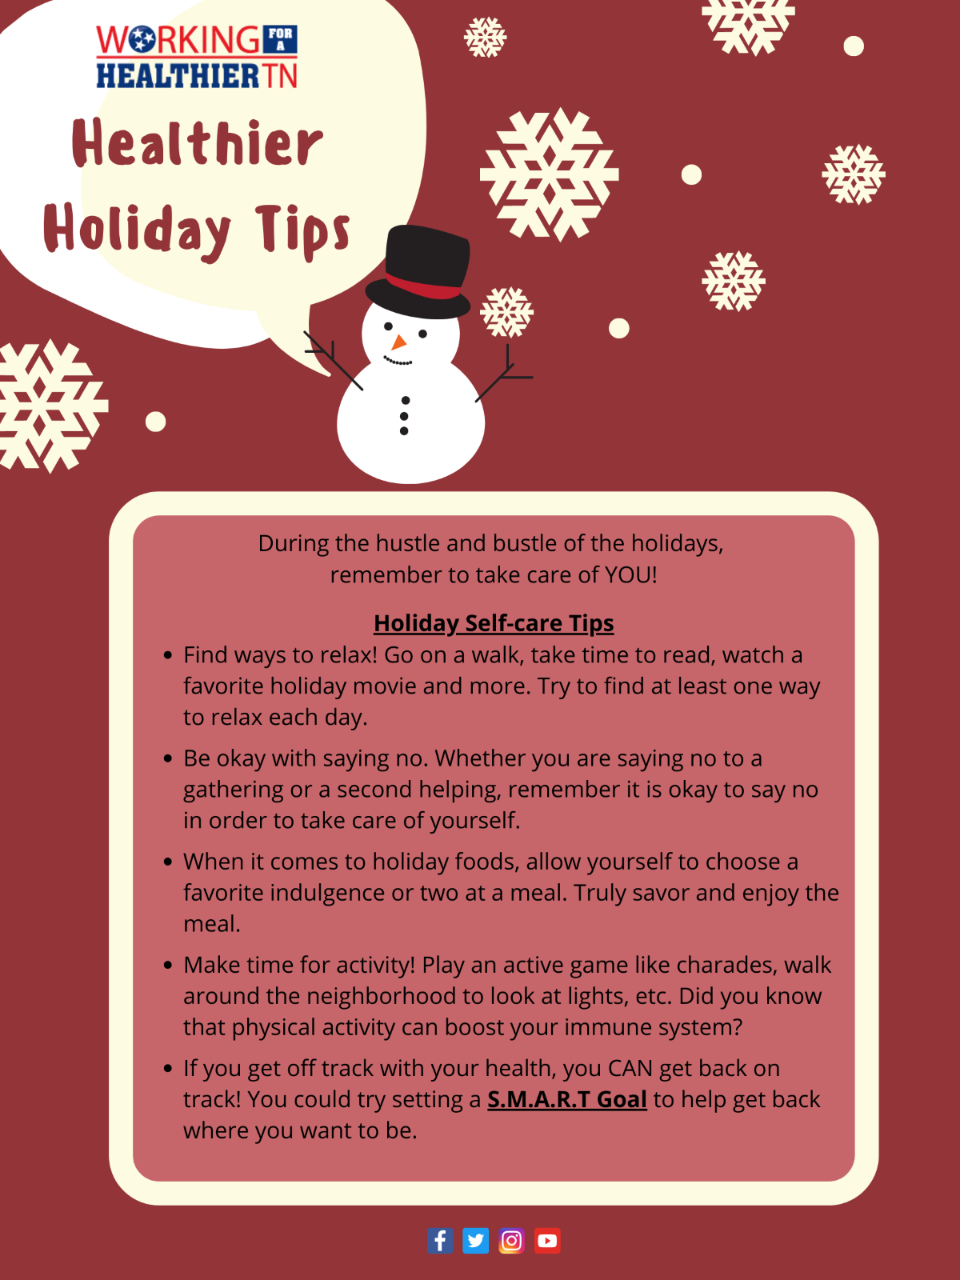 Healthier Holiday Tips